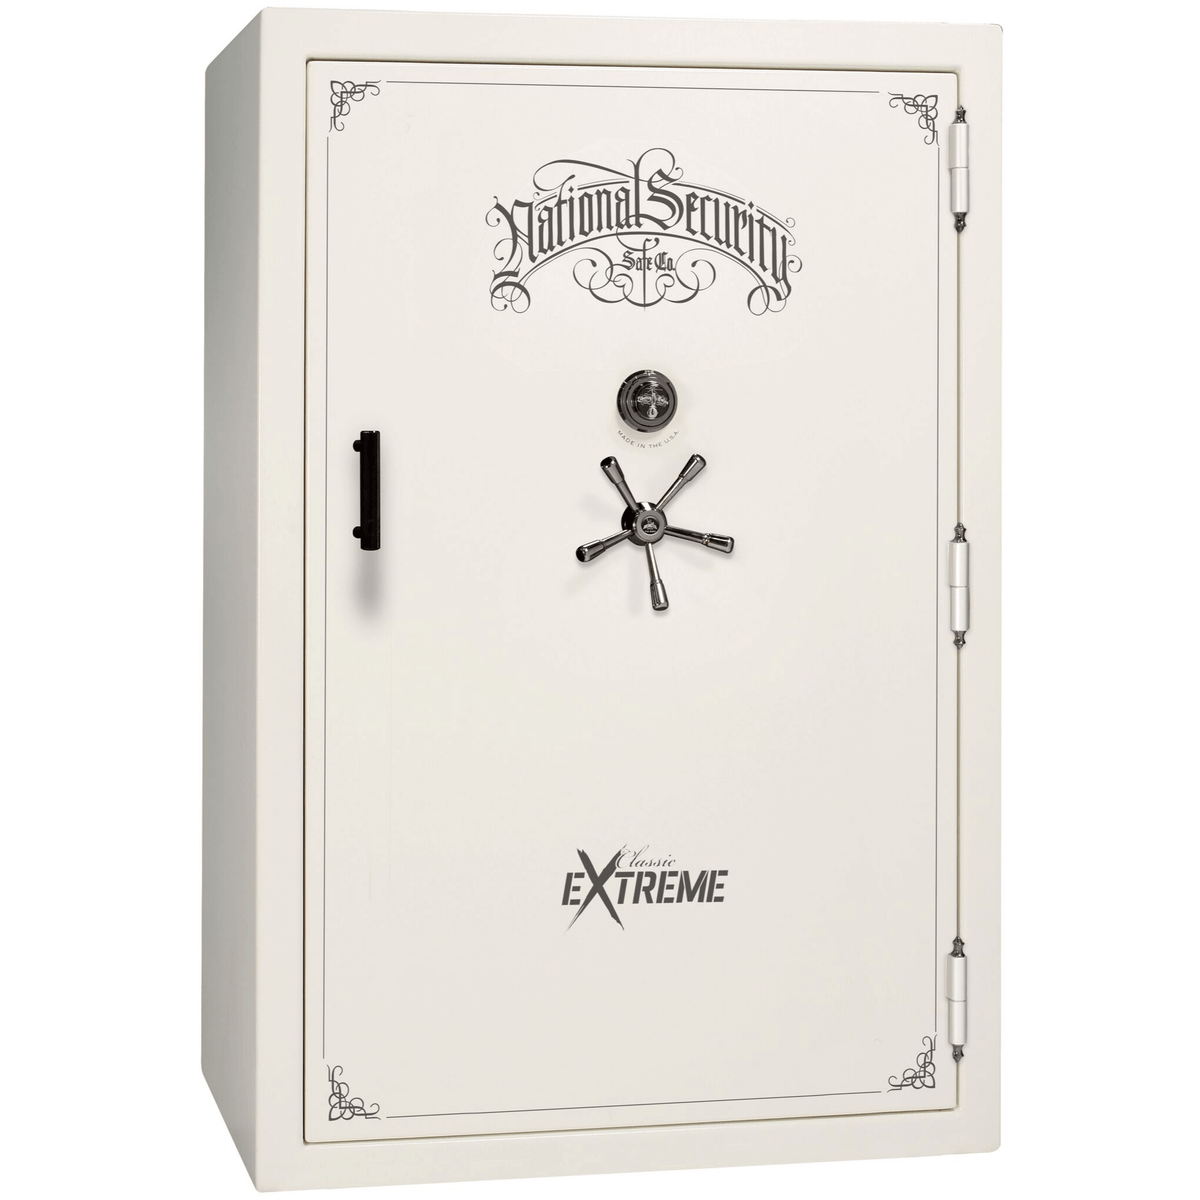 Classic extreme series | level 6 security | 90 minute fire protection - White Gloss - Mechanical - MODLOCK